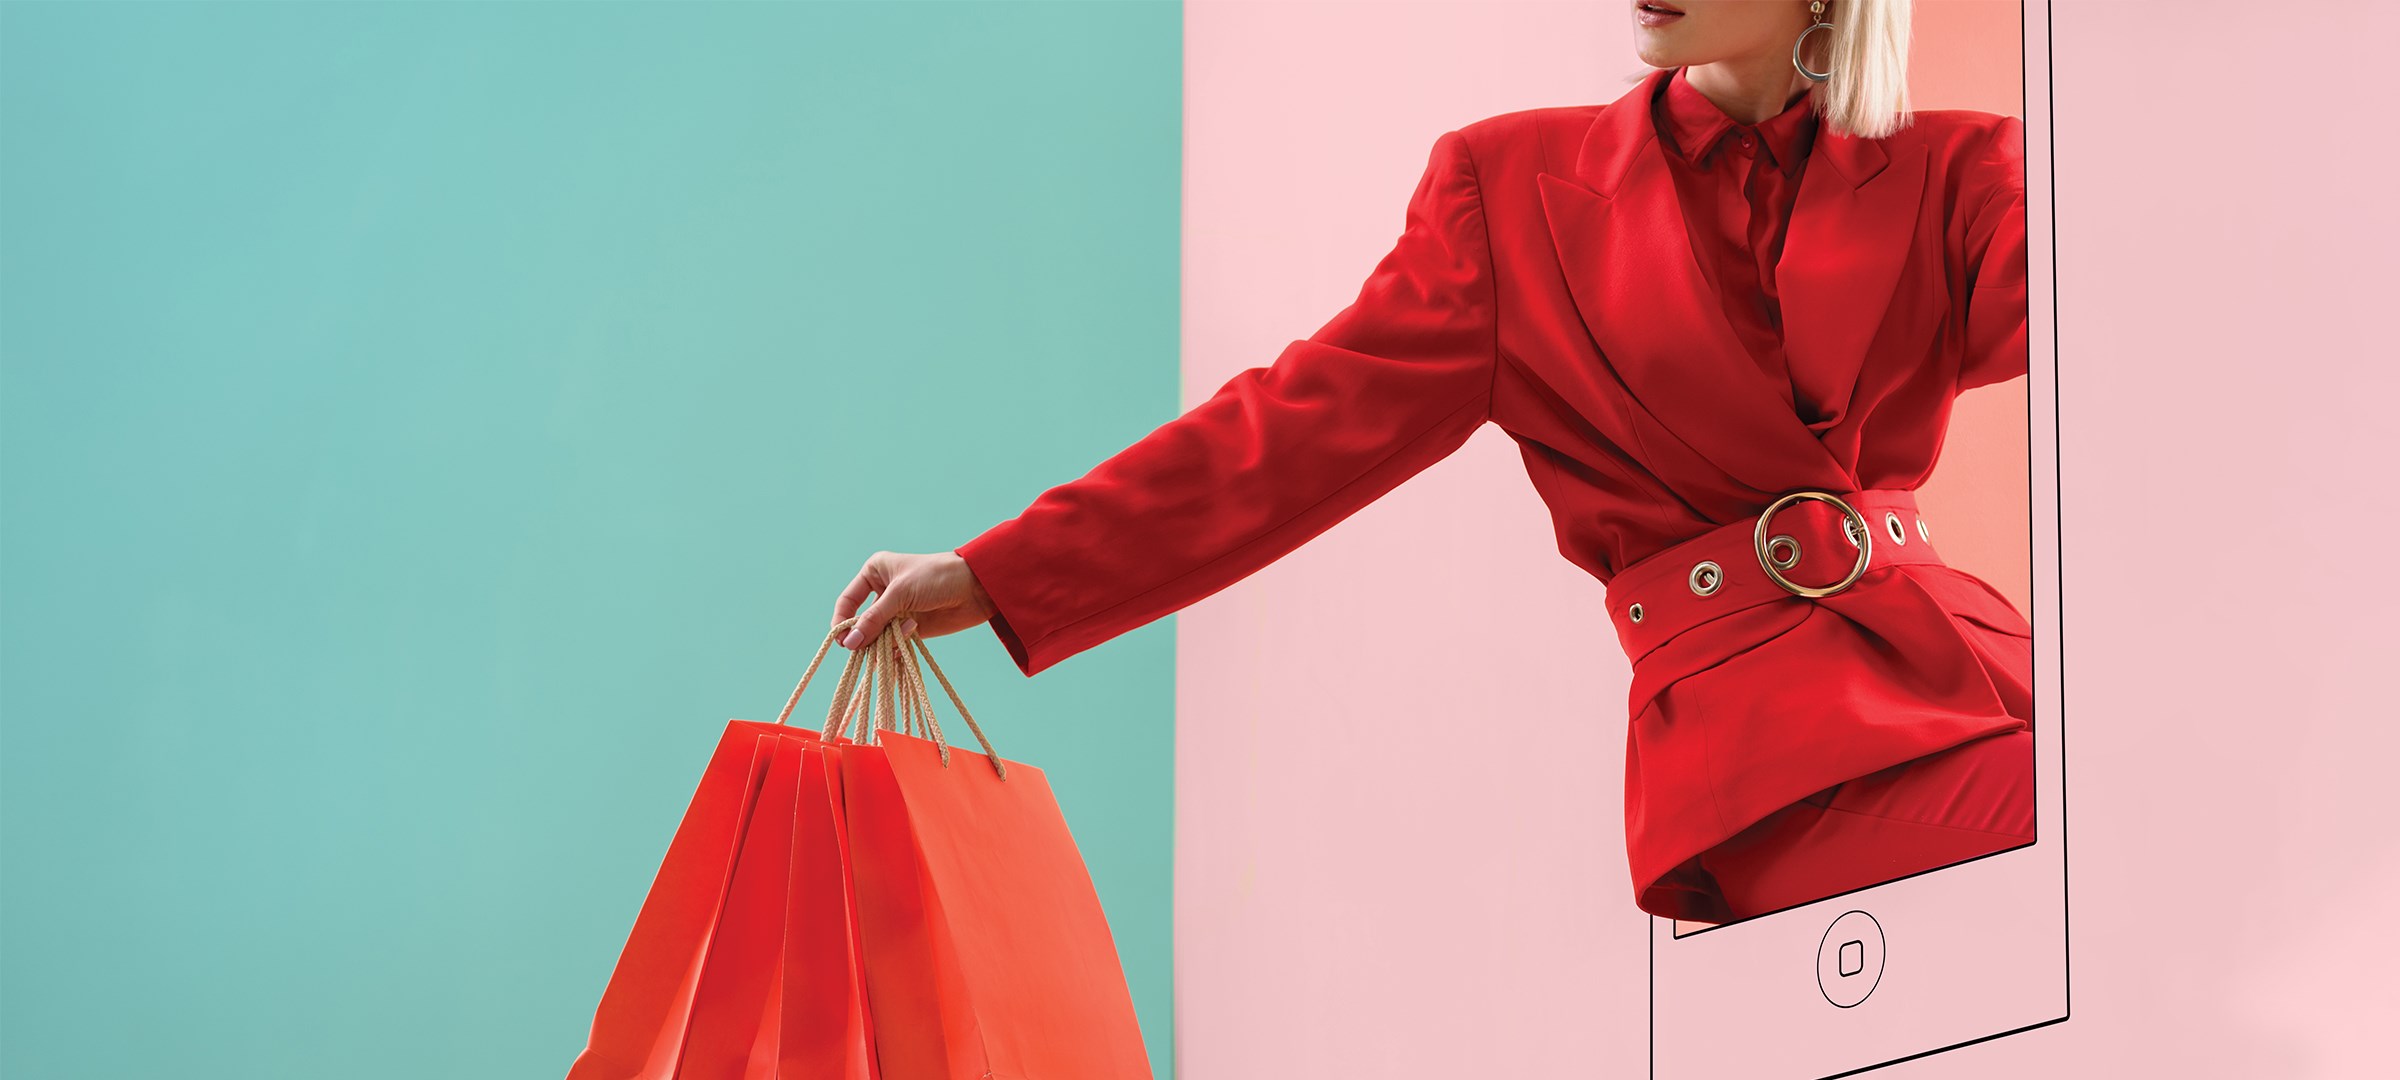 Click & Collect - 
The Trend Giving Retailers a New Edge